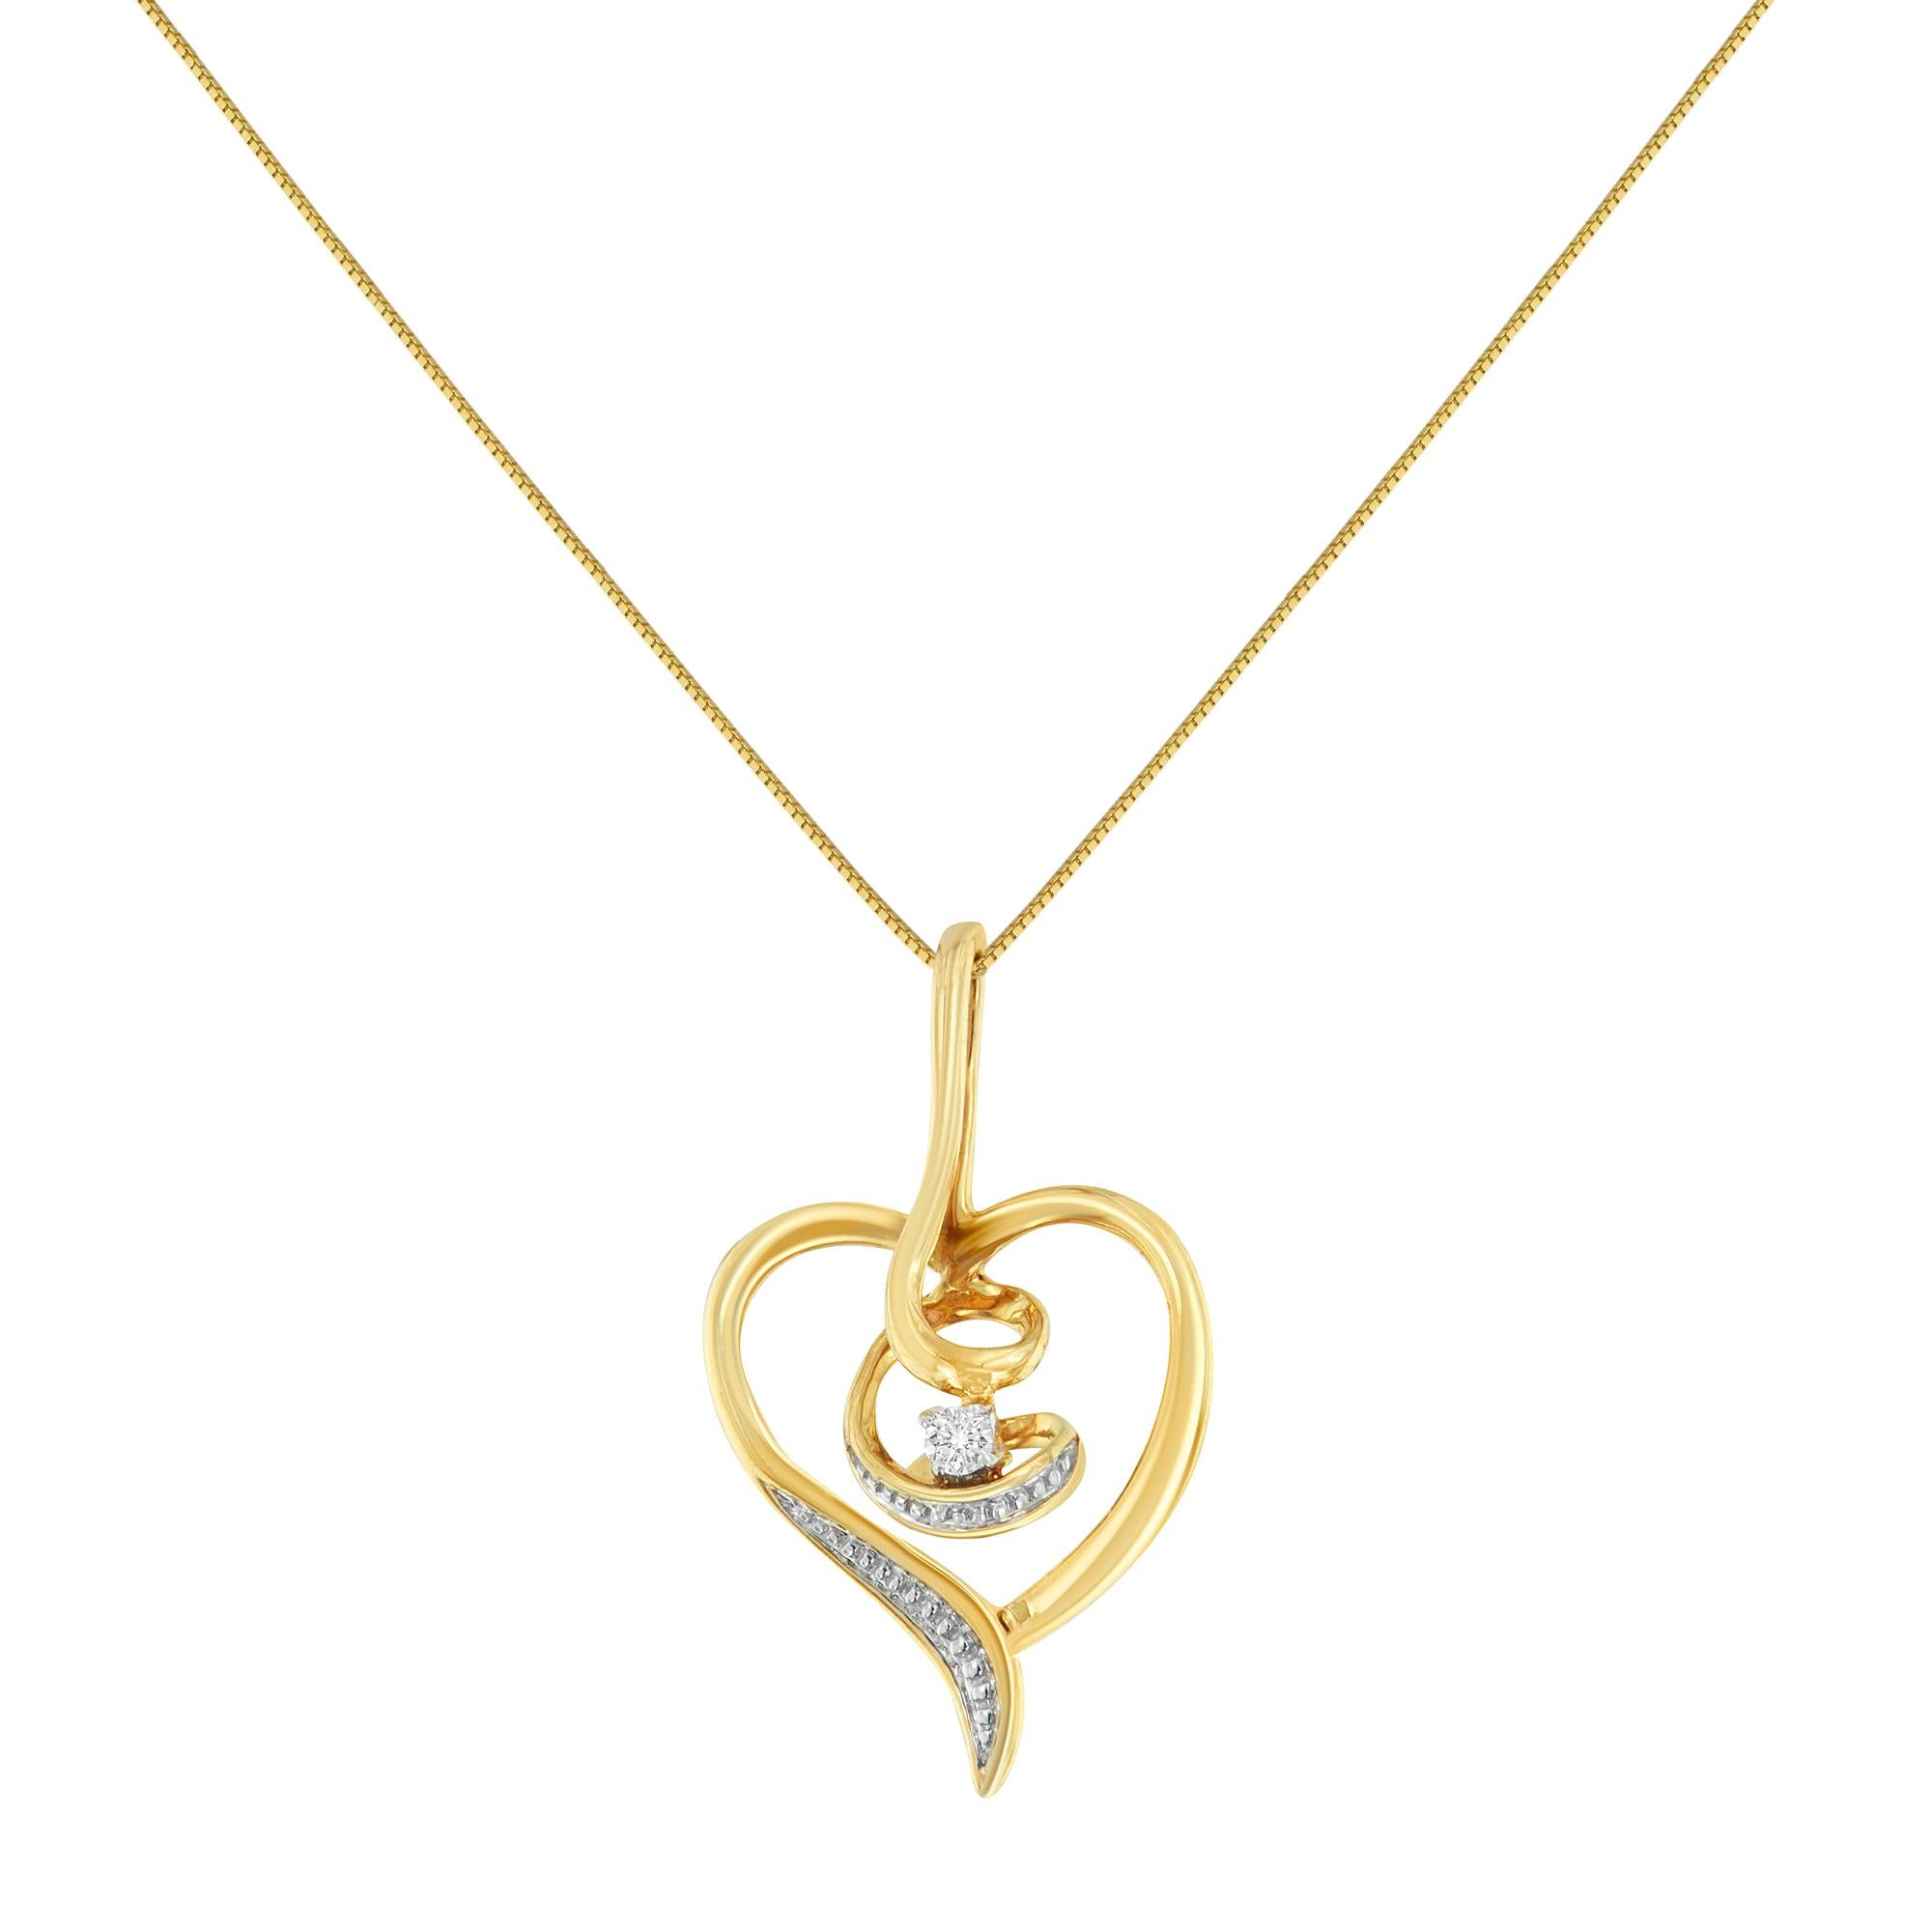 Symbolizing a love that never ends, this impeccably designed real 10kt gold heart pendant swirls at the center and sparkles with a scattering of diamonds. It's a classic romantic surprise she'll want to show off every day. This necklace makes a